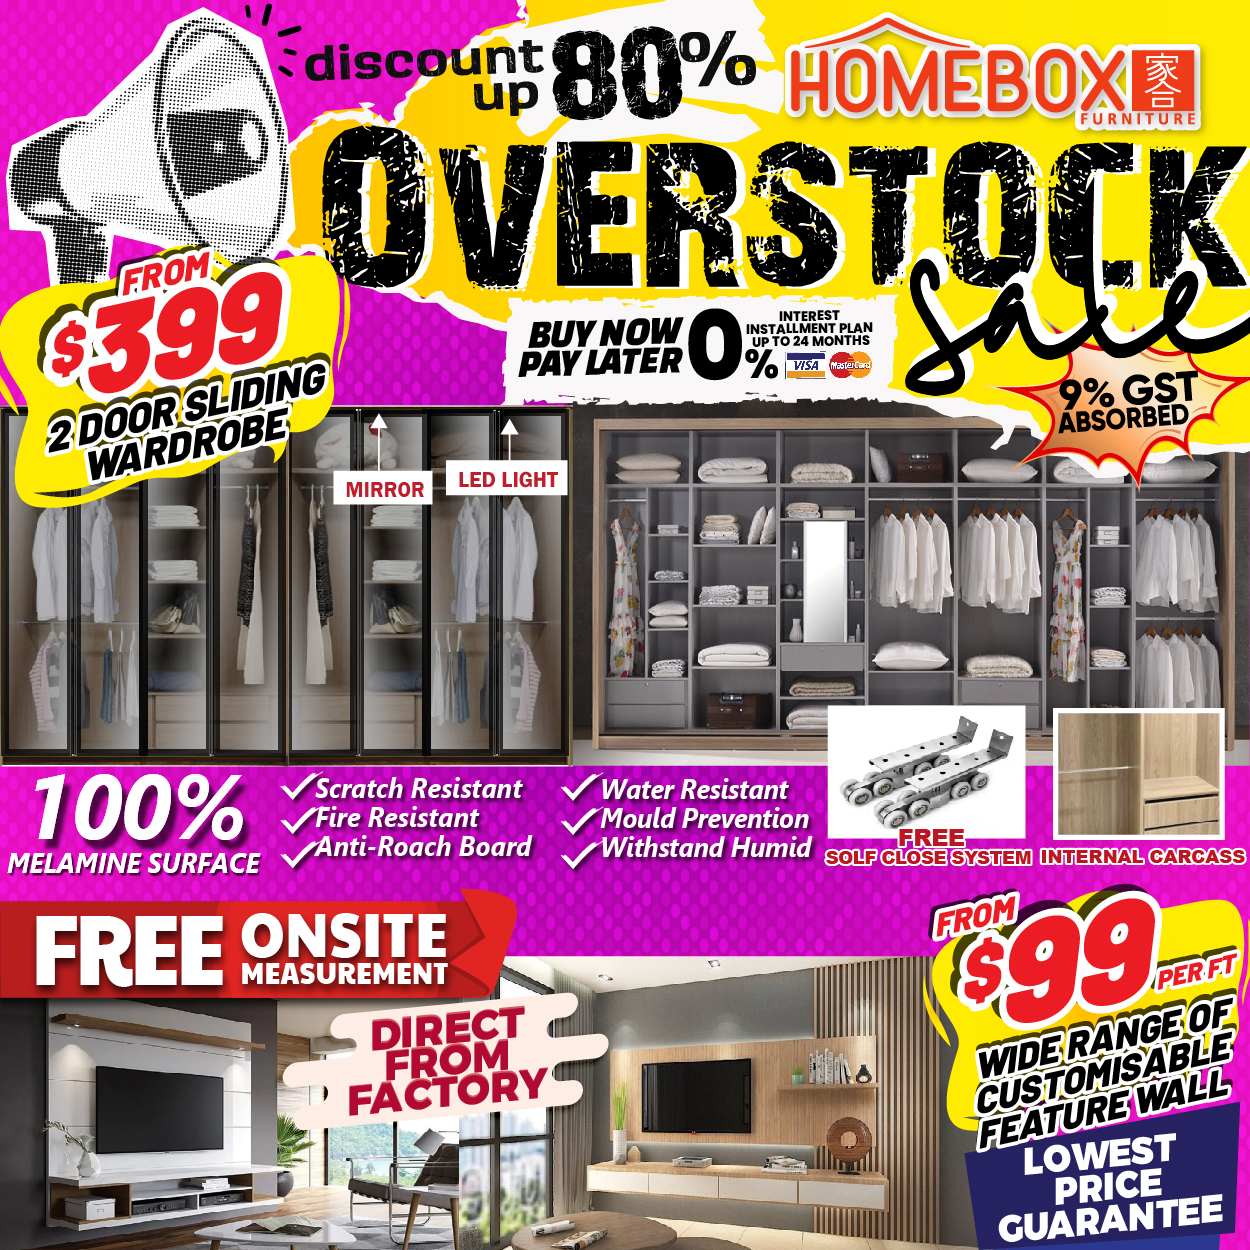 Lobang: Overstock sale at HOMEBOX Furniture @ Aljunied has furniture at up to 80% off from 17 Feb - 3 Mar 24 - 14